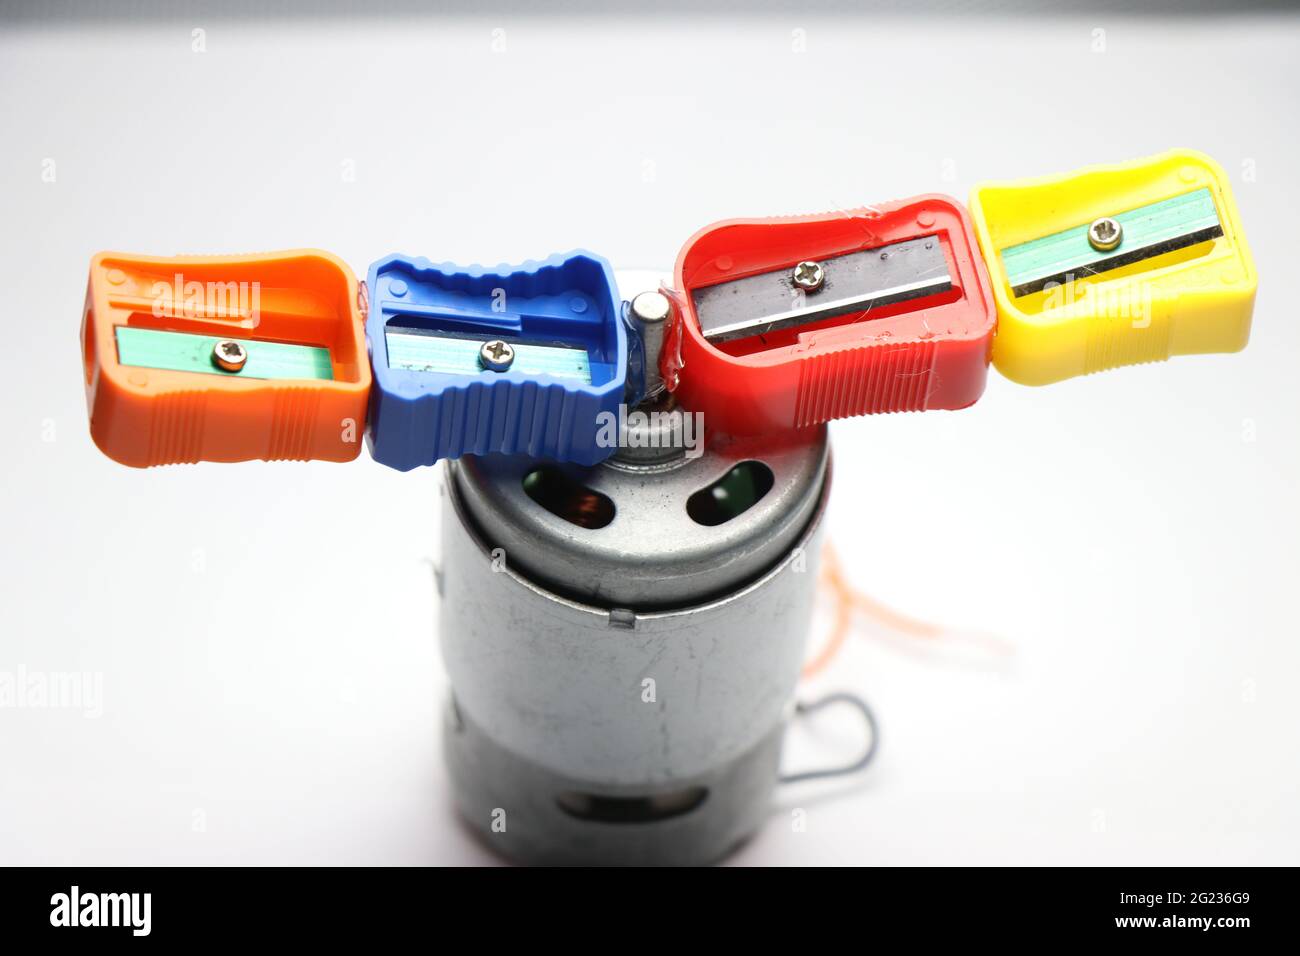 Life hacks from dc motor and pencil sharpener. DC Motor projects concept  using sharpener attached to its shaft Stock Photo - Alamy